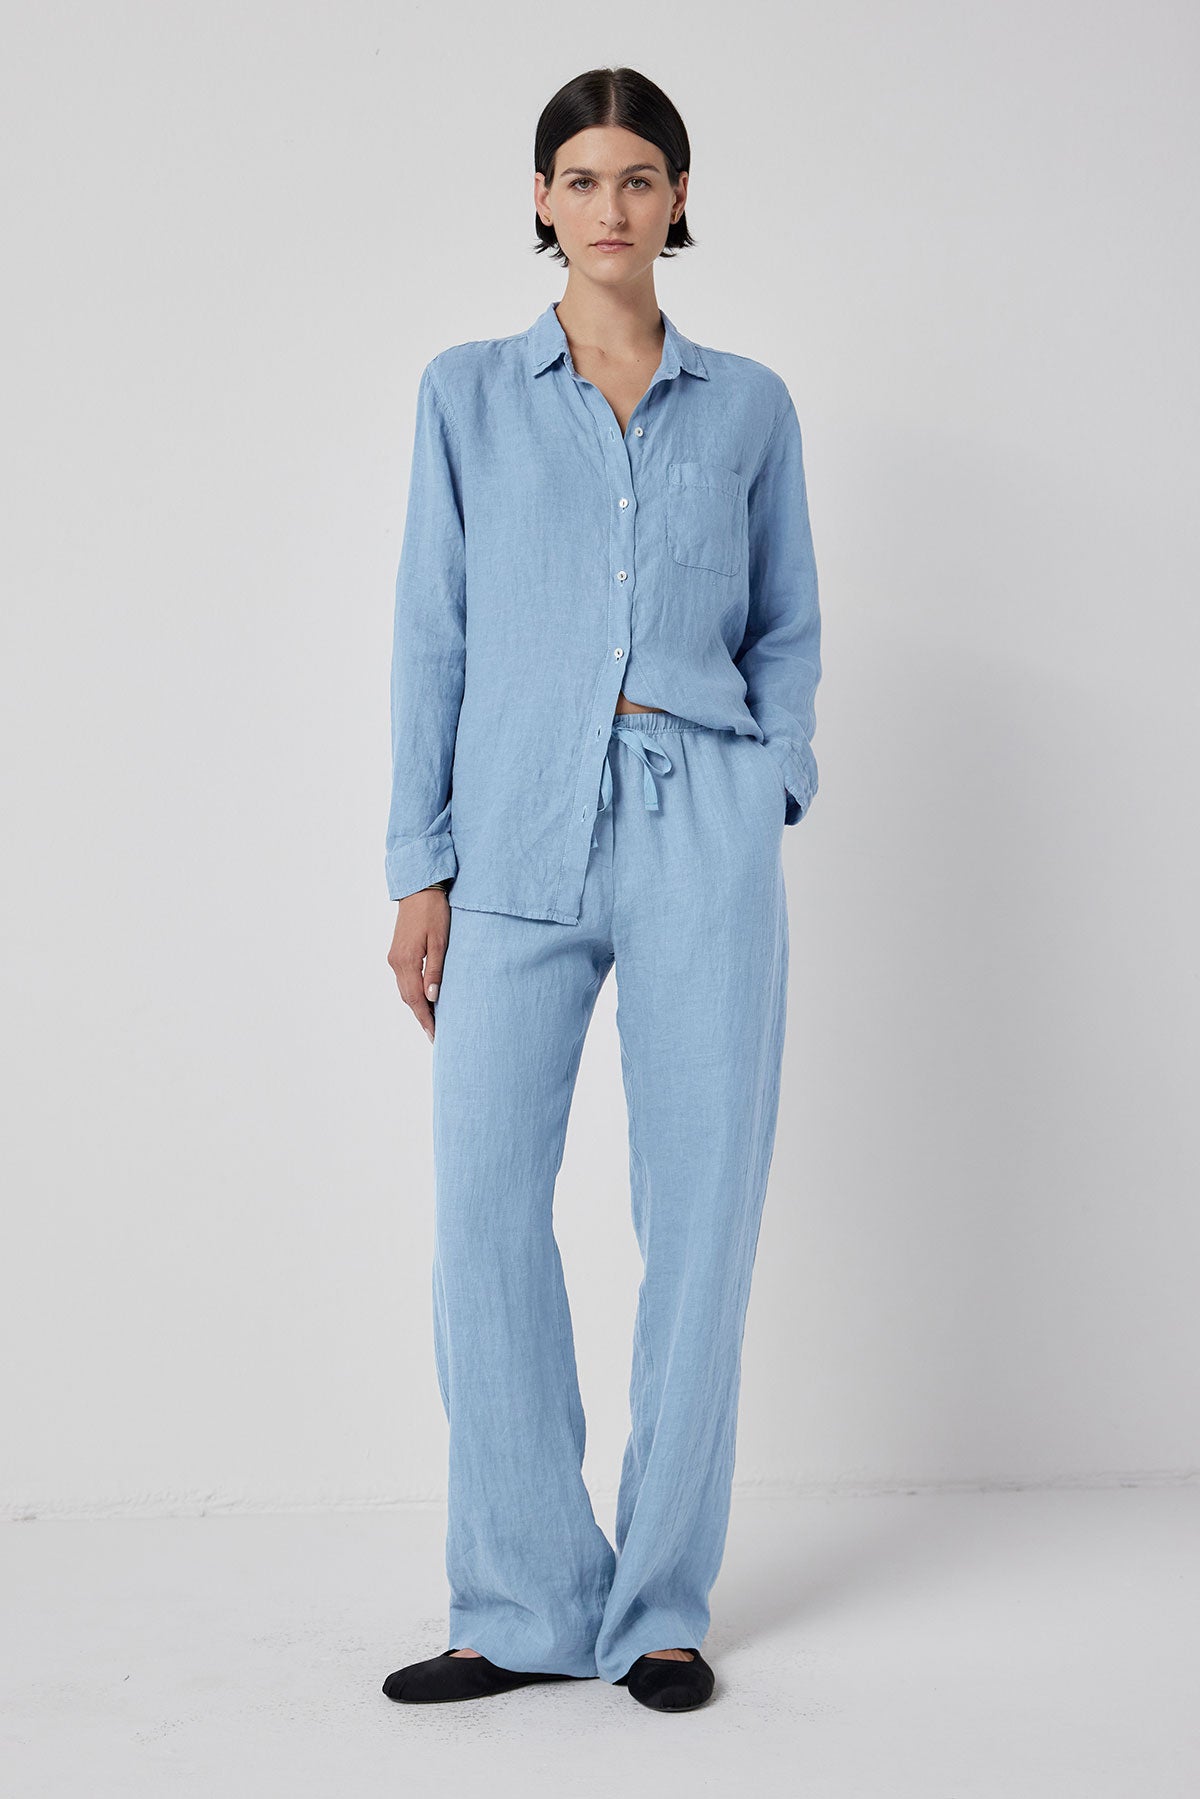   A woman standing in a studio wearing a light blue button-up shirt and matching PICO LINEN PANTS by Velvet by Jenny Graham, with her hands slightly tucked in relaxed fit linen pants. 